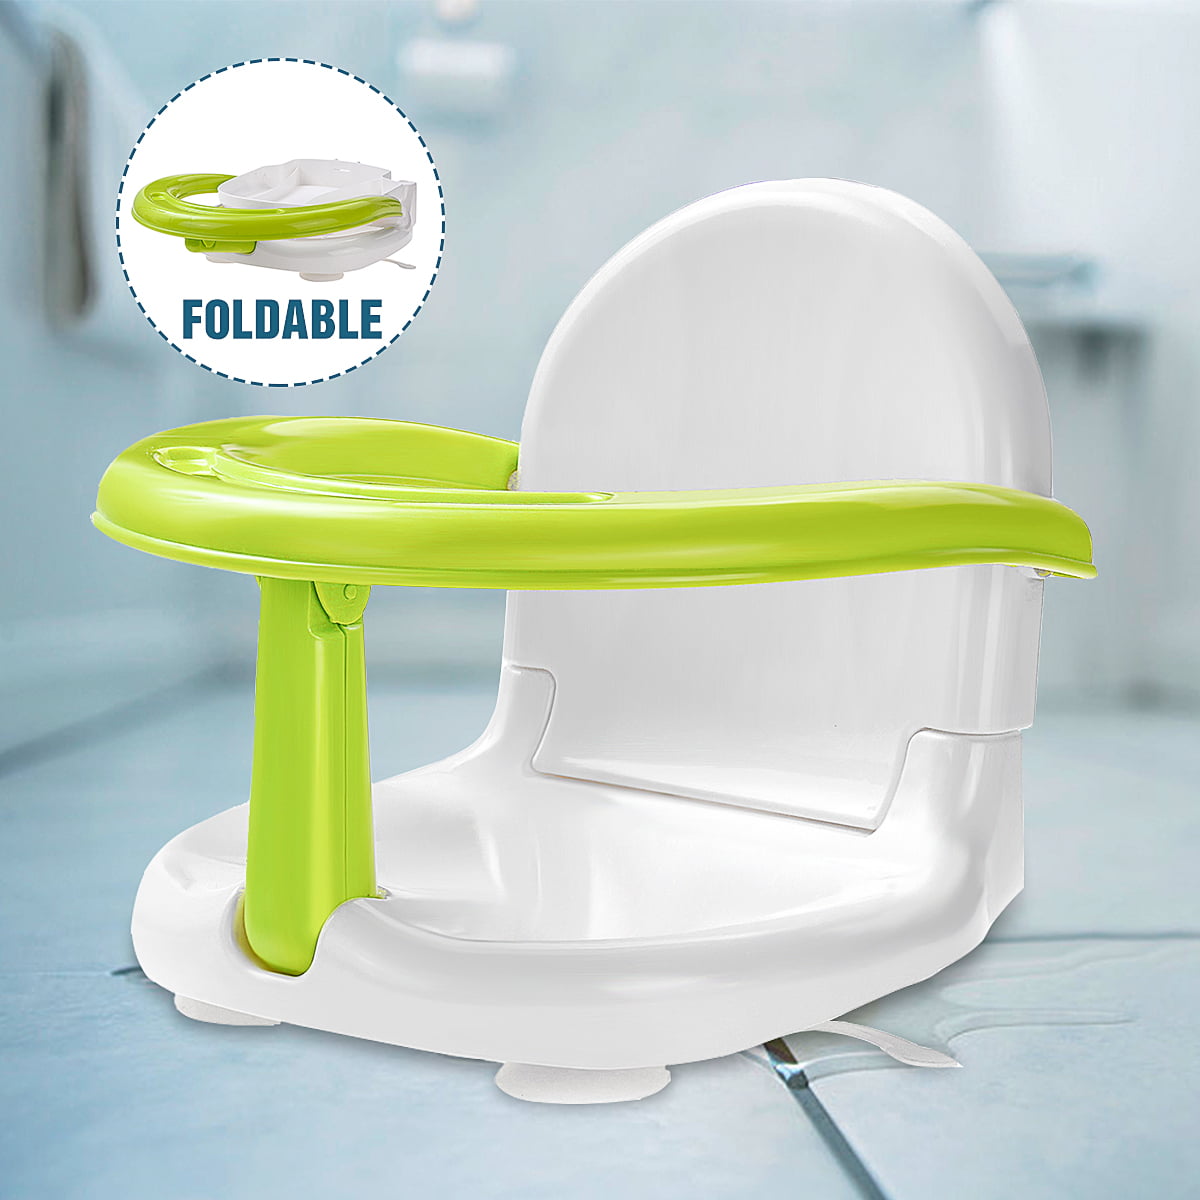 Foldable Baby Bath Seat Folding Anti-Skid Safety Shower Seat Newborn Baby Bathtub Seat Learning Seat Tub Ring Seat 17.3&times;13&times;4.7&quot;